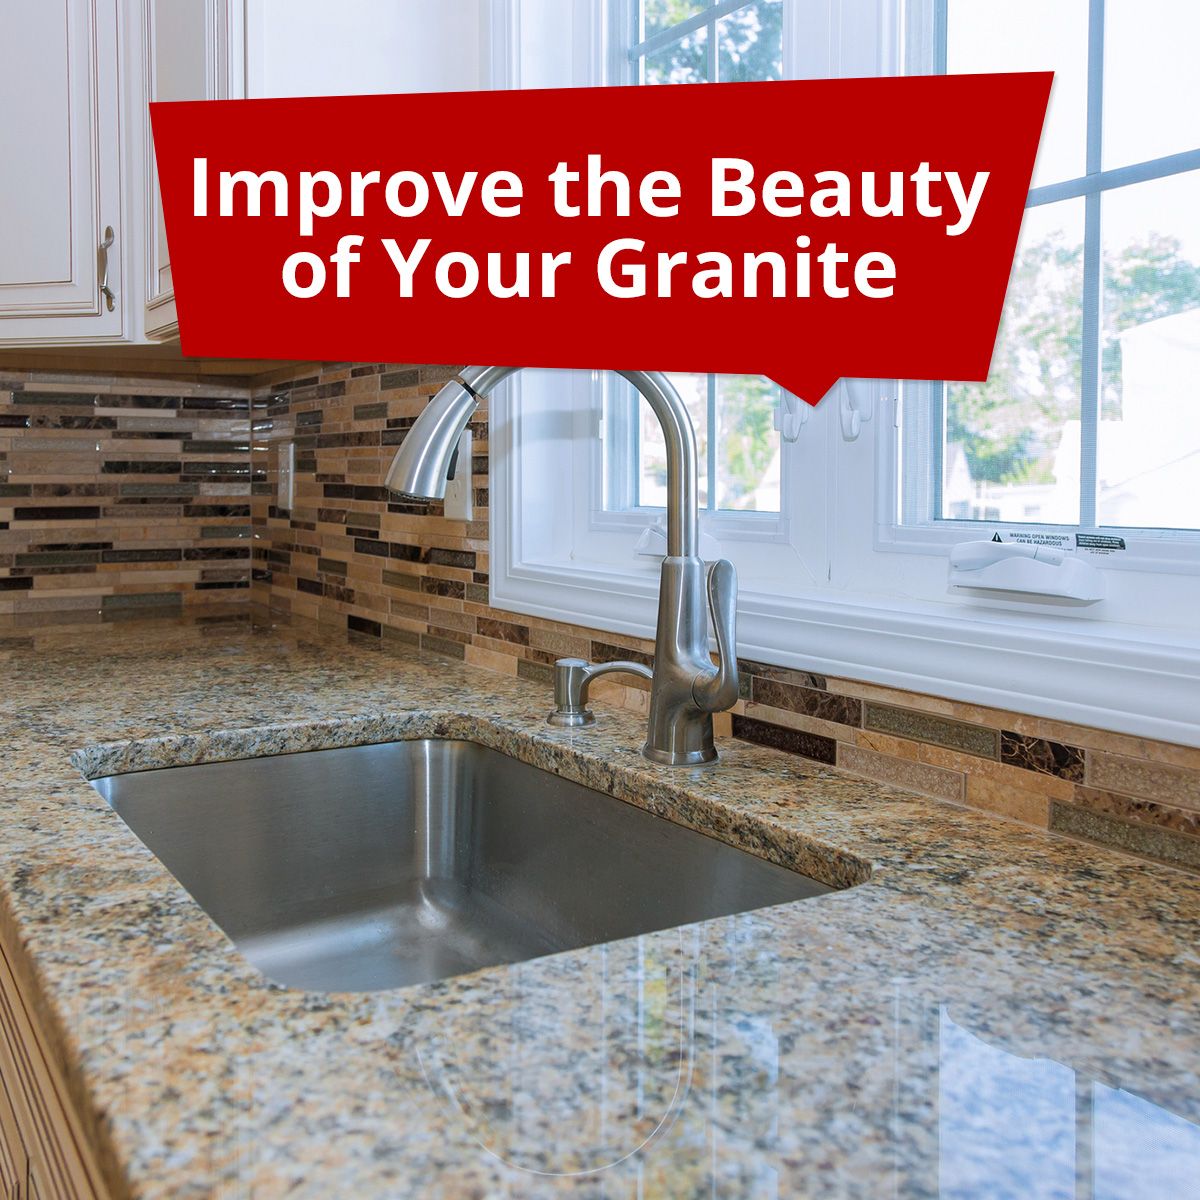 Improve the Beauty of Your Granite